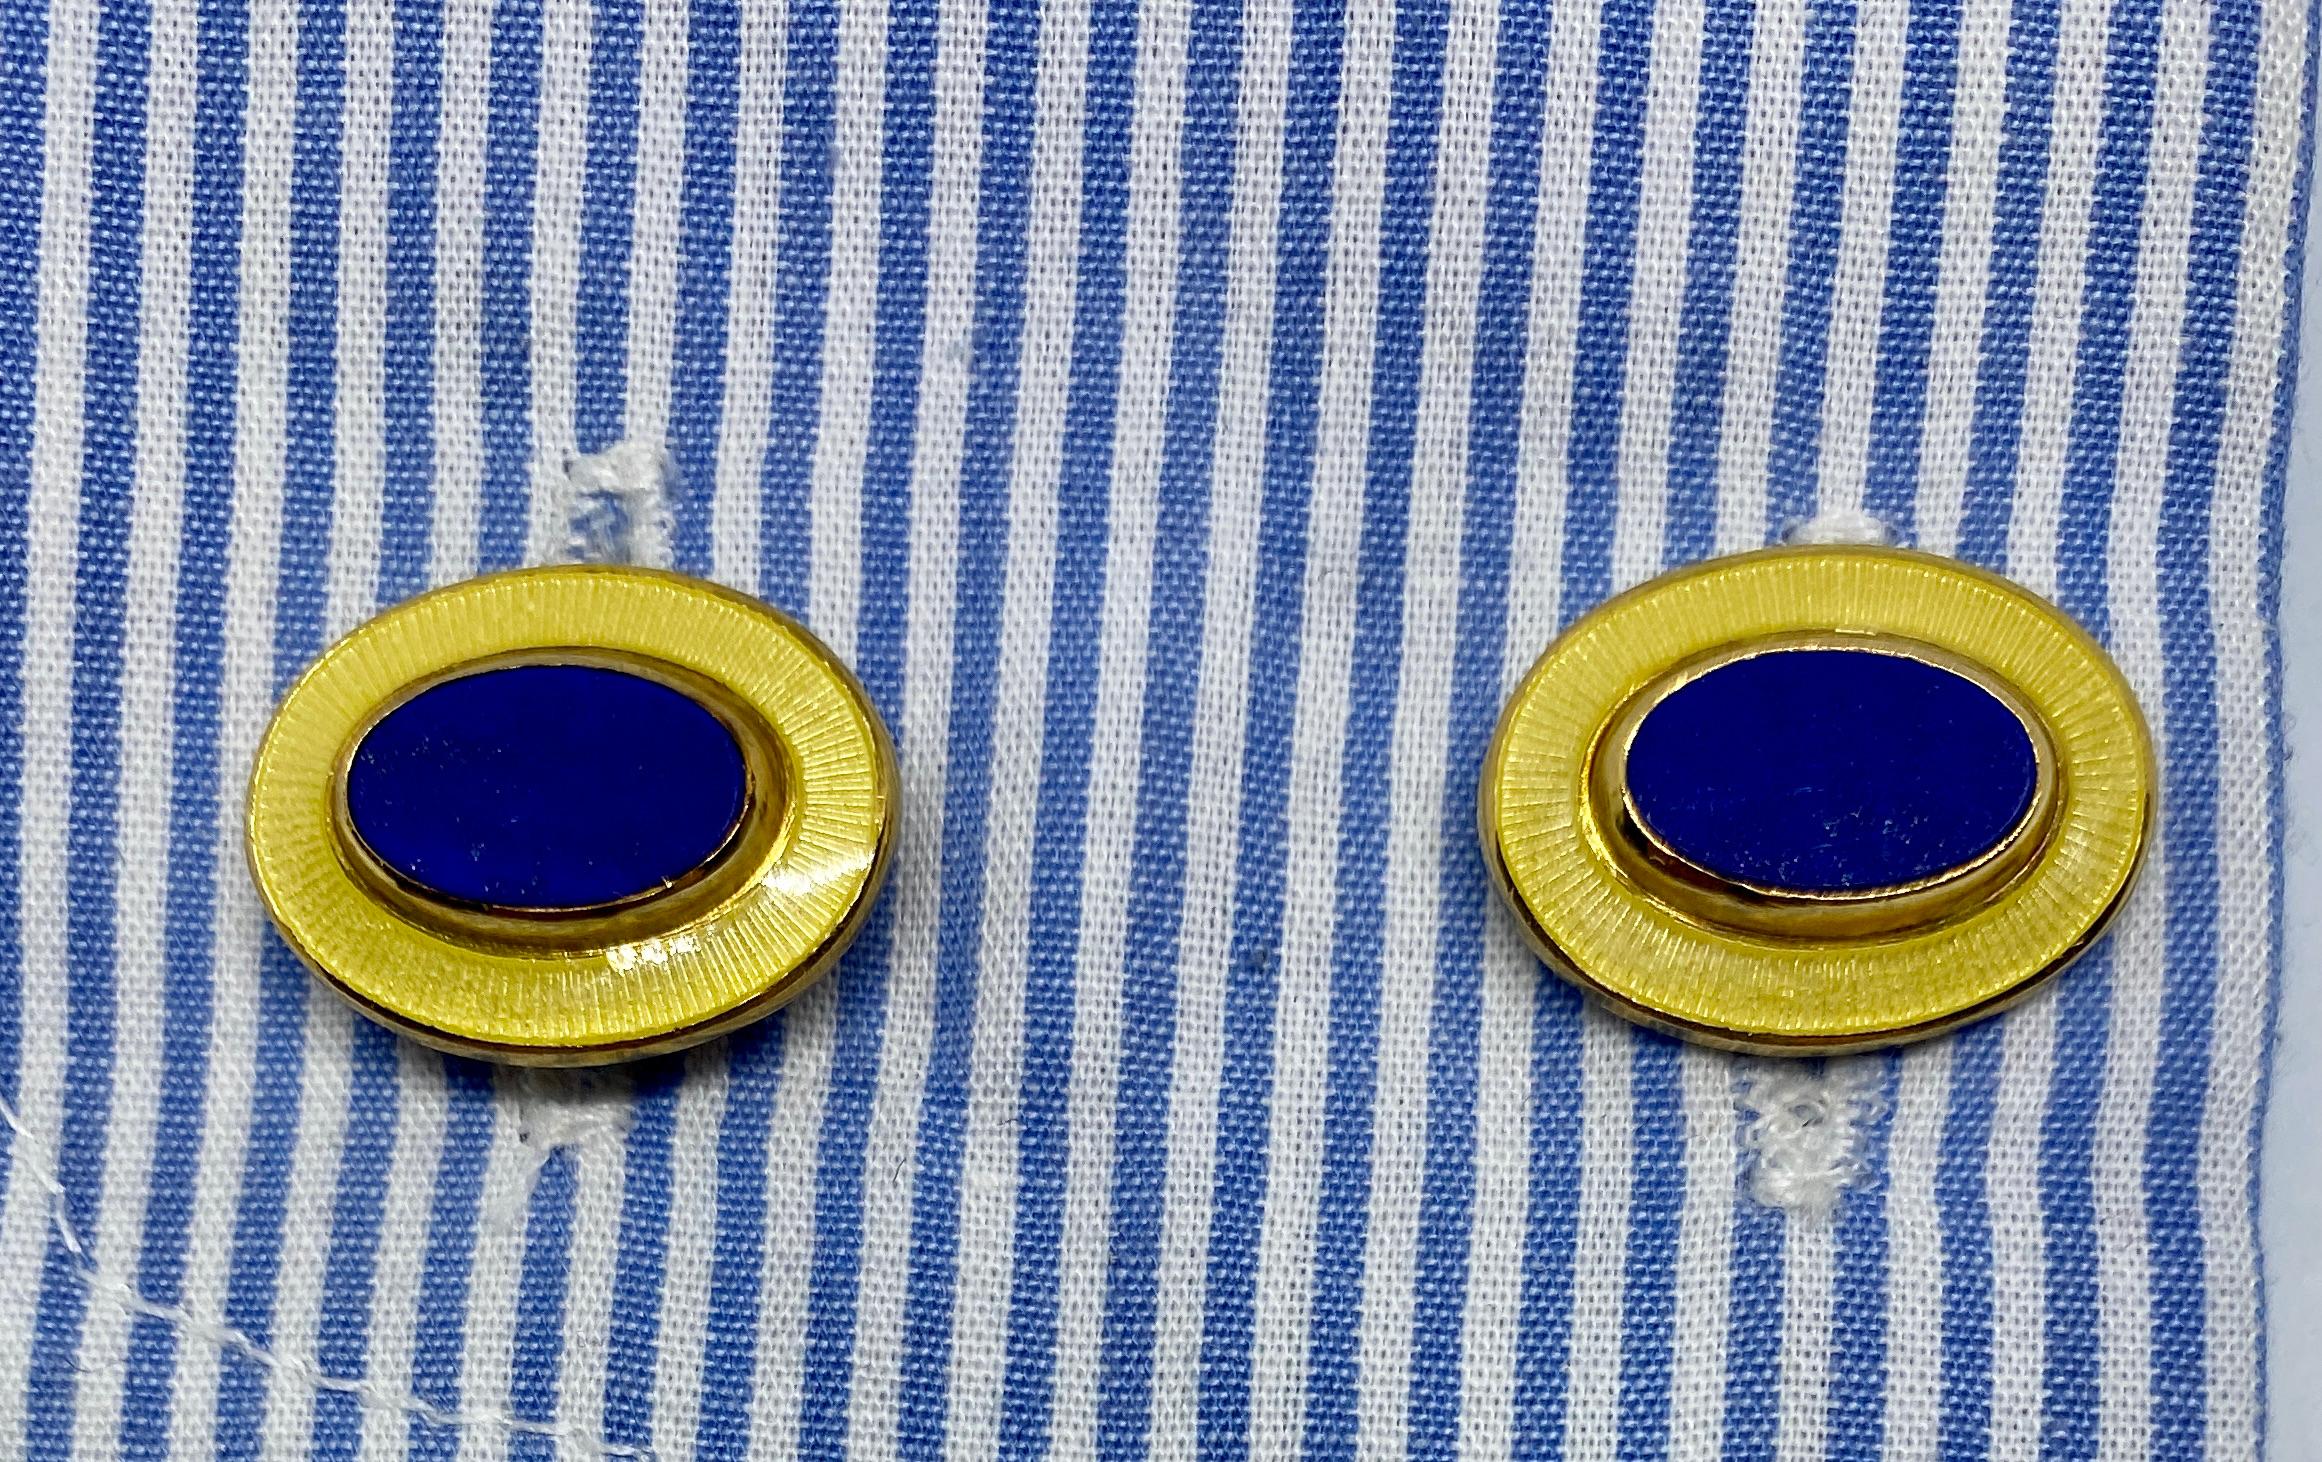 Oval Cut Deakin & Francis Cufflinks in 18 Karat Yellow Gold with Inset Lapis and Enamel